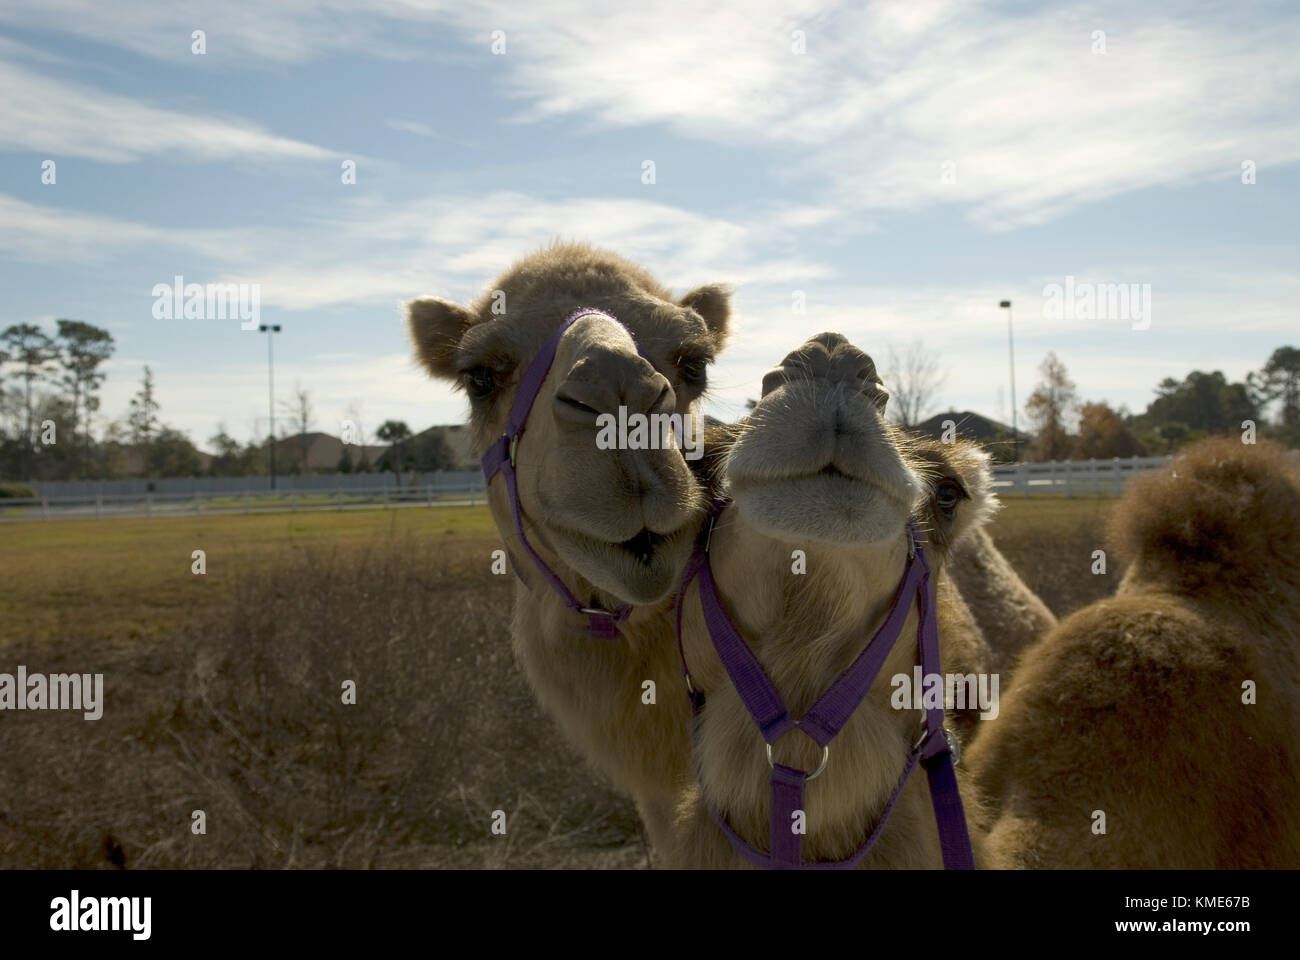 Pair of camels in playful situation.. USA Stock Photo